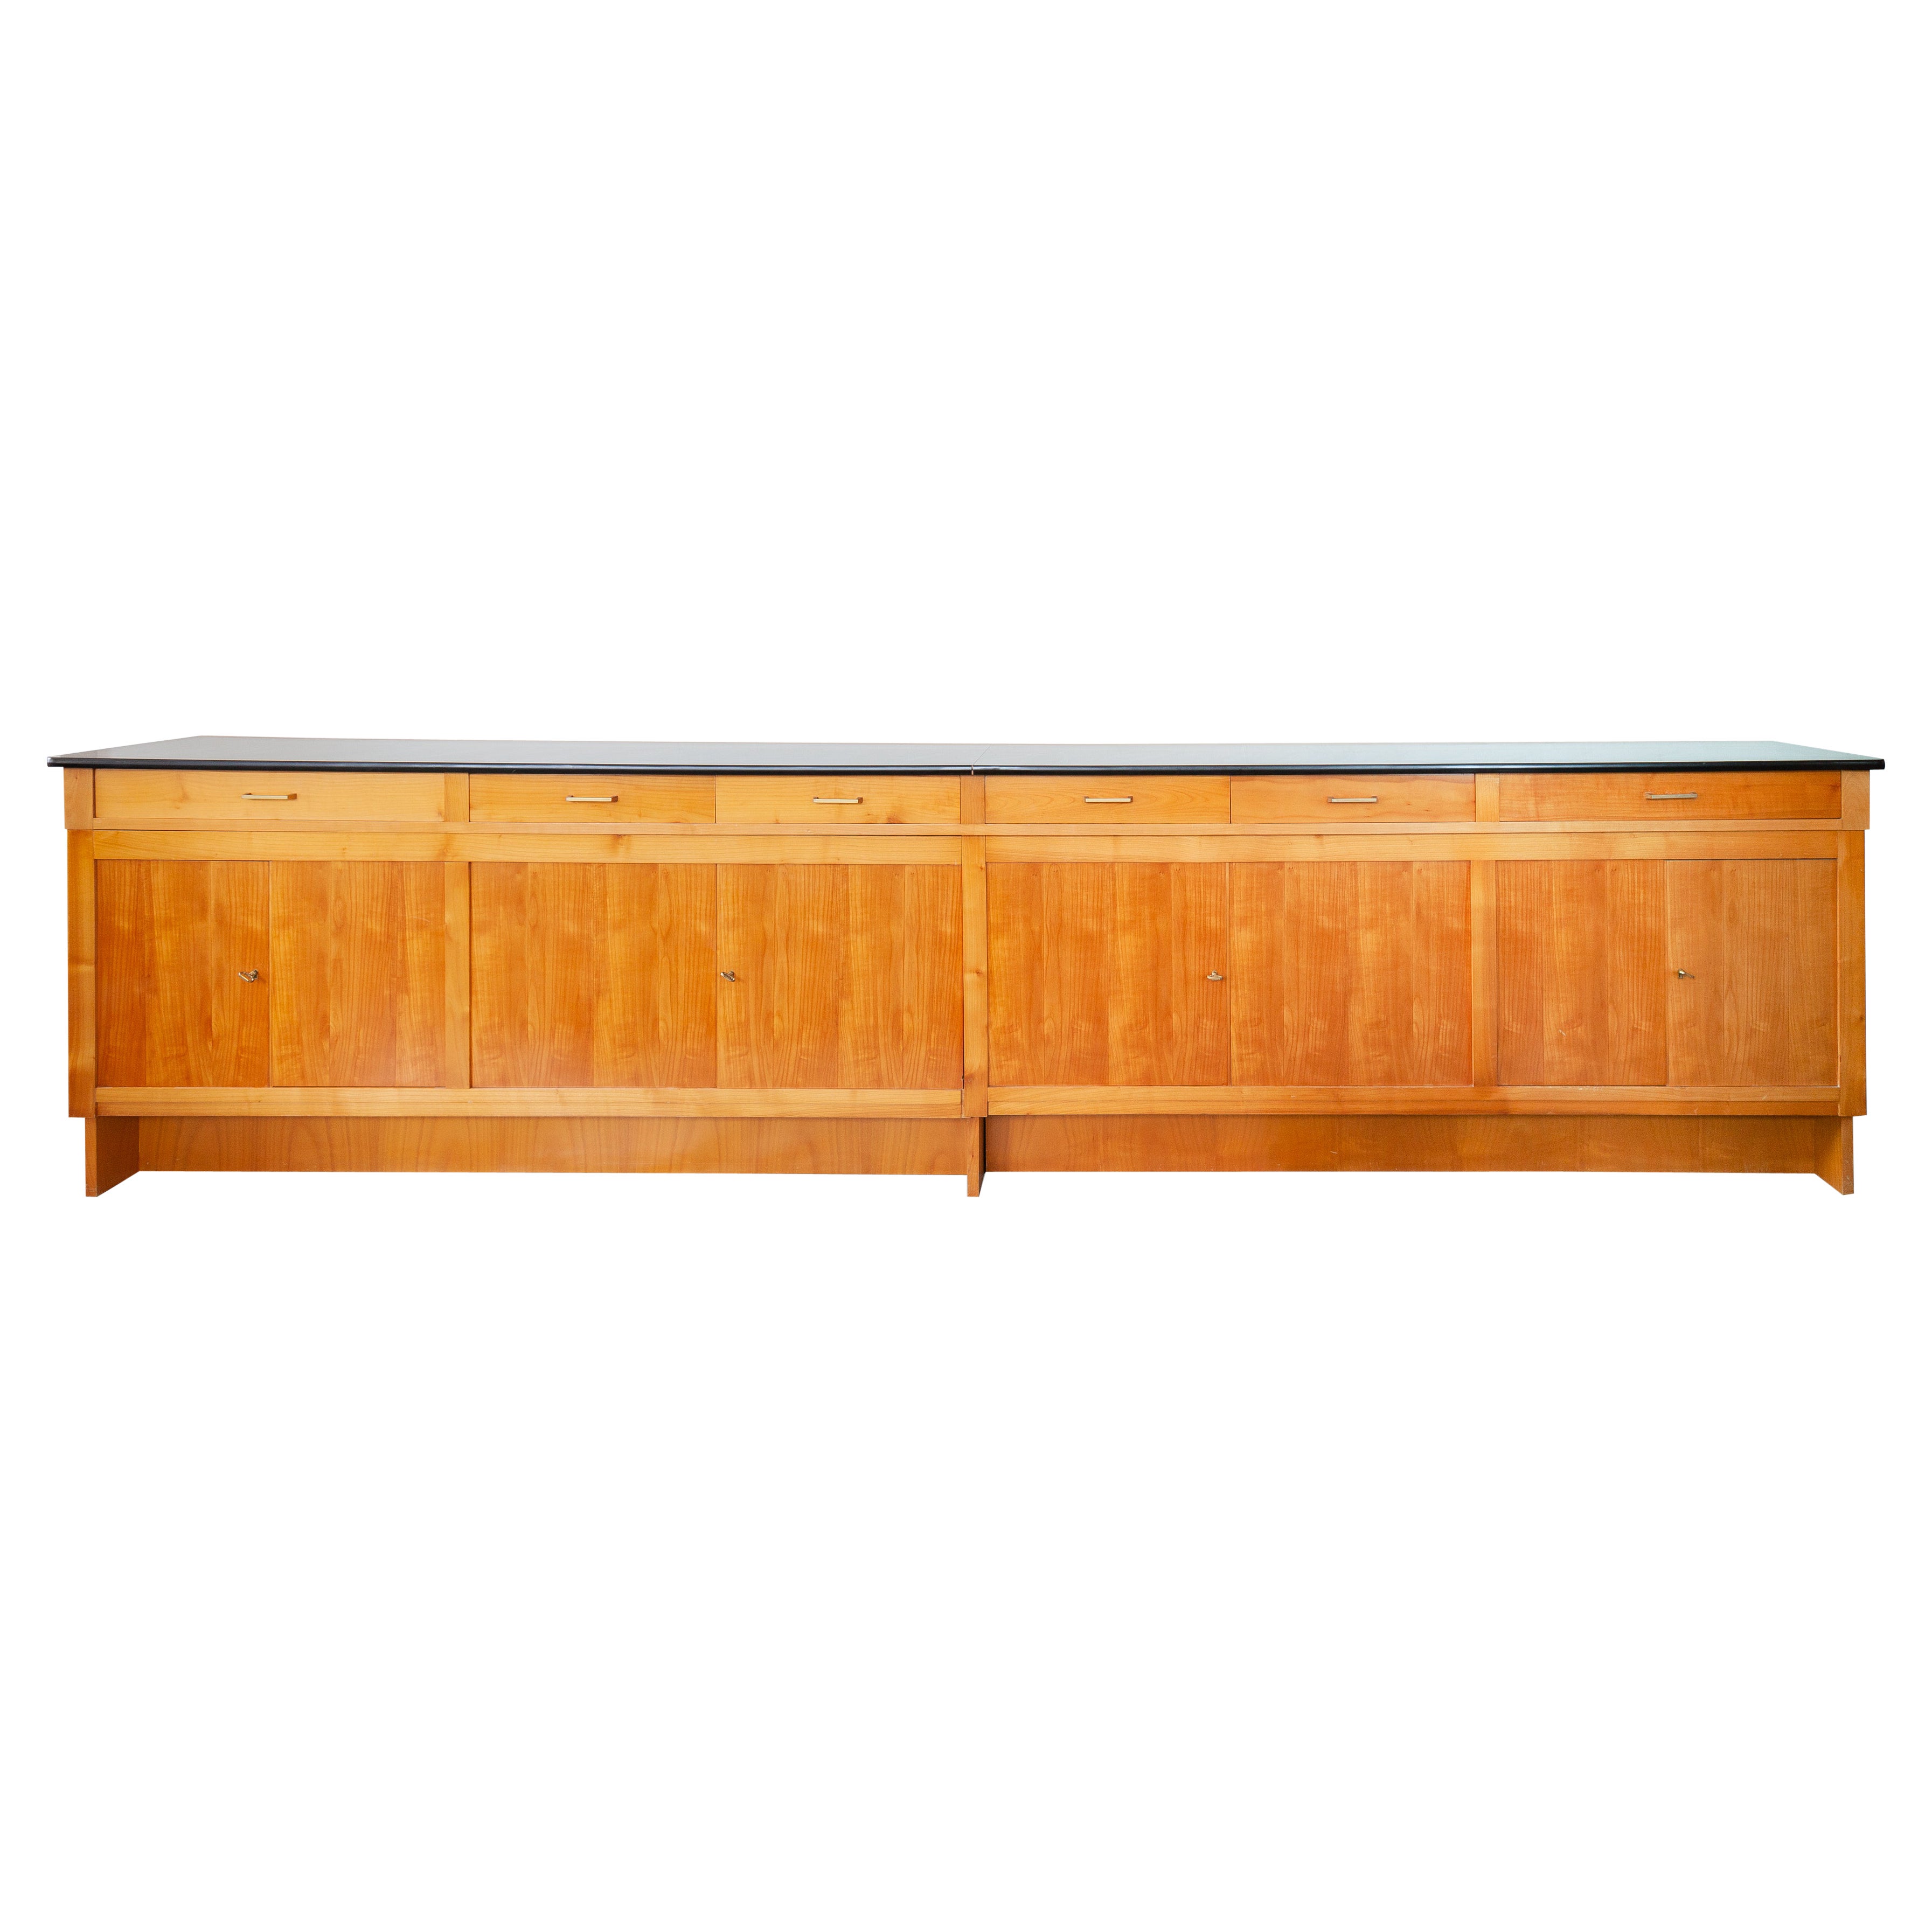 Large Sideboard in Ash Wood, 1960s For Sale